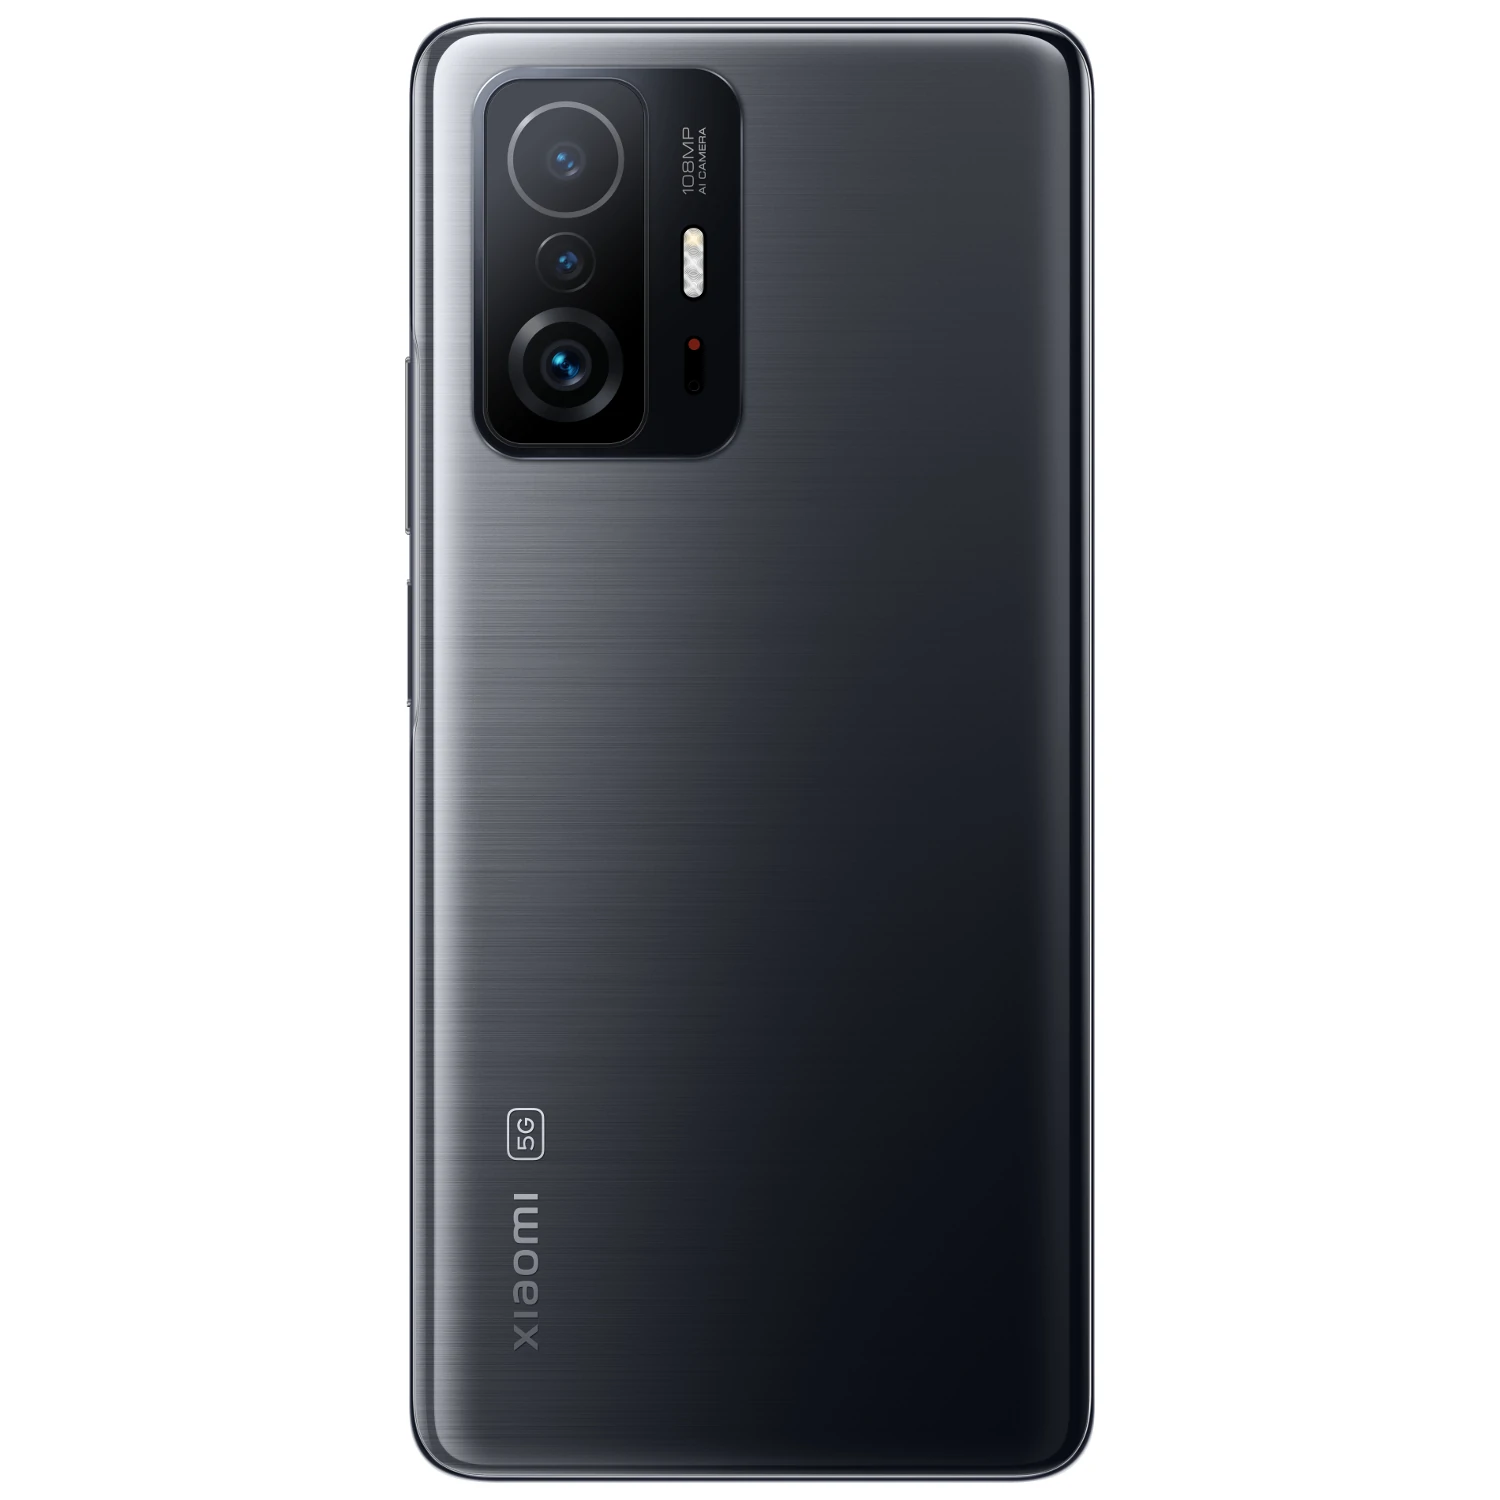 Find Xiaomi 11T Pro Global Version 120W Fast Charge 108MP Triple Camera 8GB 128GB Snapdragon 888 6 67 inch 120Hz AMOLED NFC Octa Core 5G Smartphone for Sale on Gipsybee.com